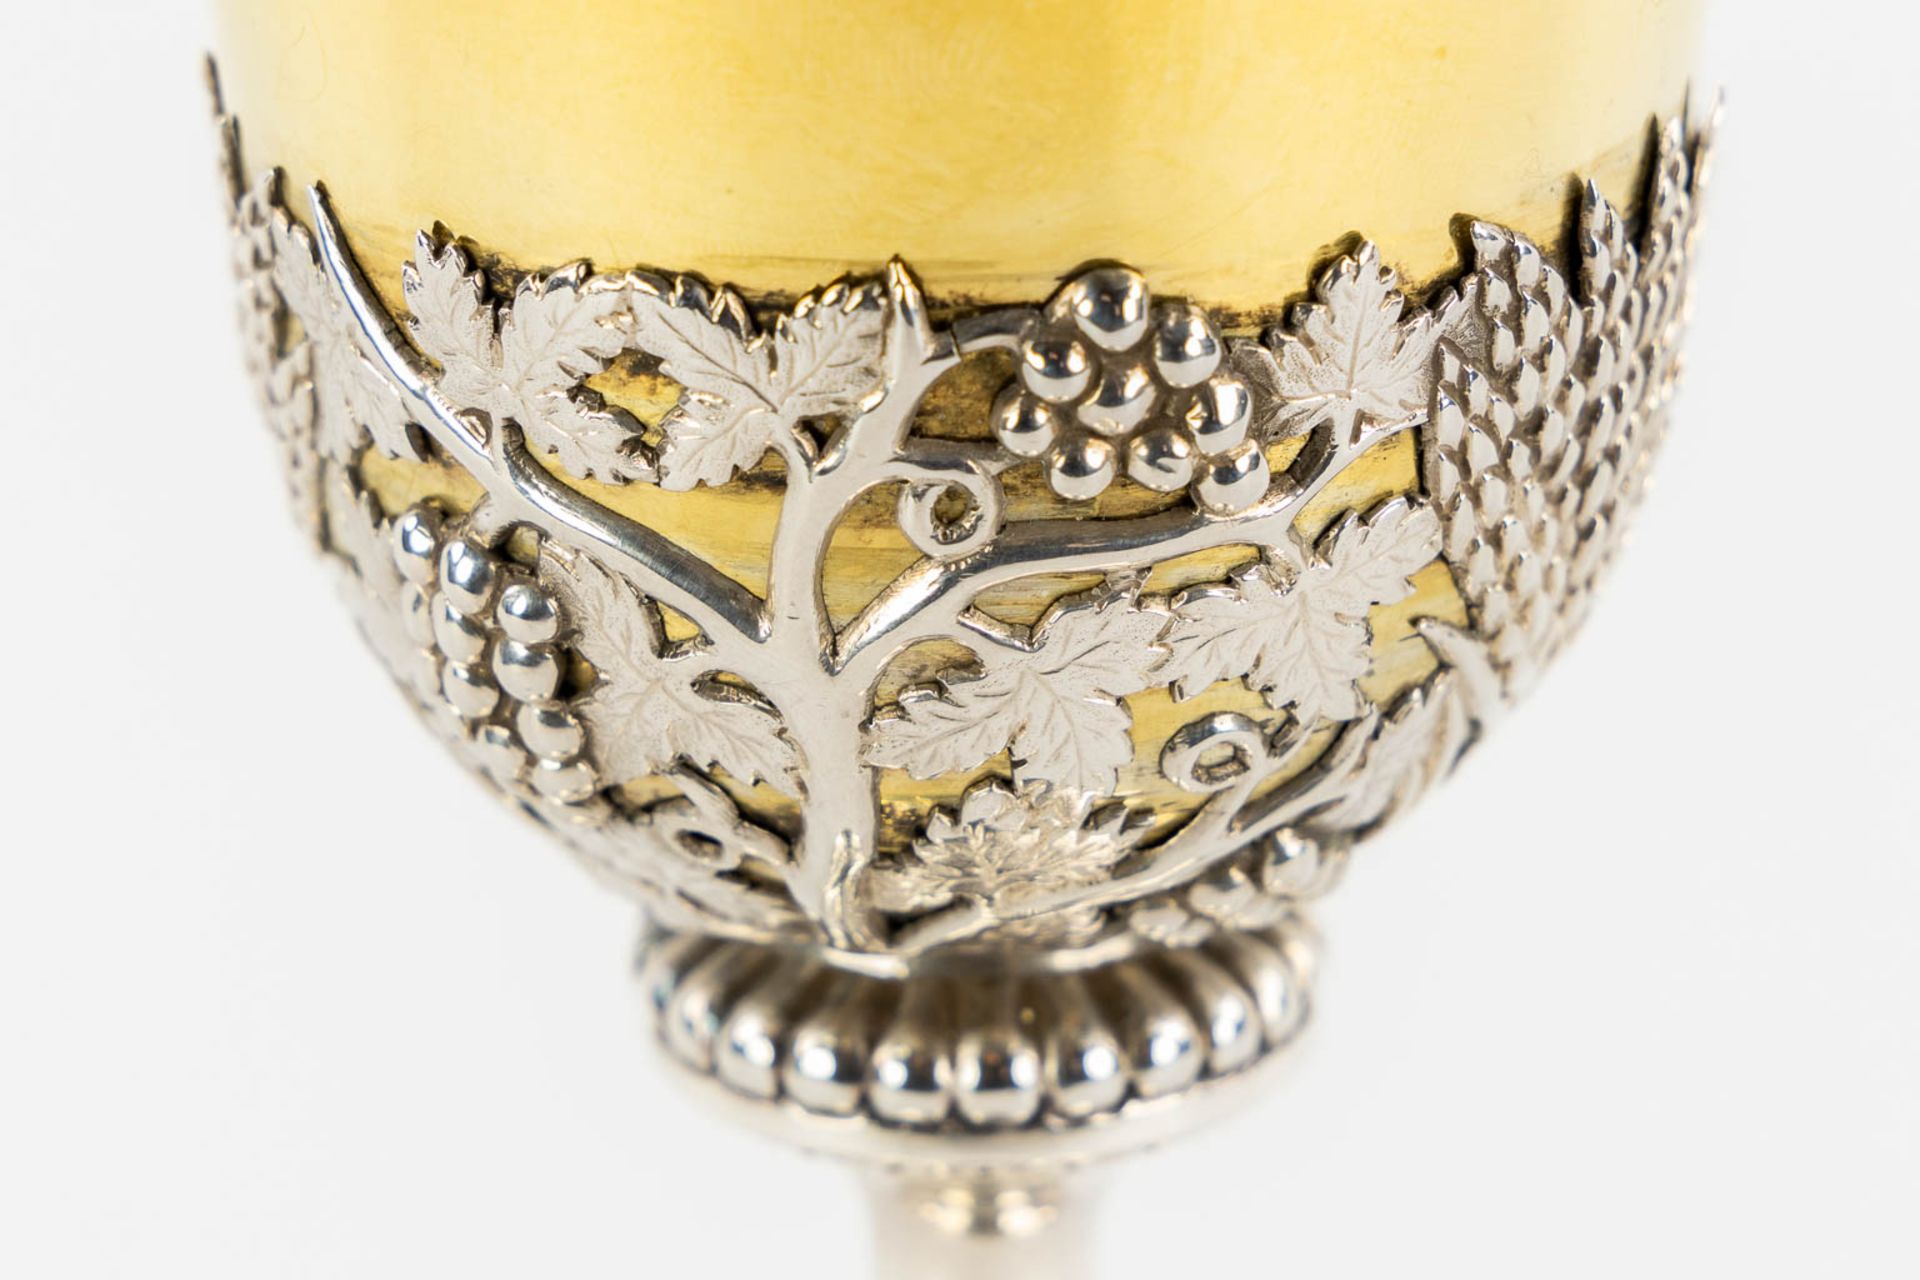 A chalice, silver-plated metal and gold-plated silver, Gothic Revival. 19th C. (H:27 x D:15 cm) - Image 8 of 9